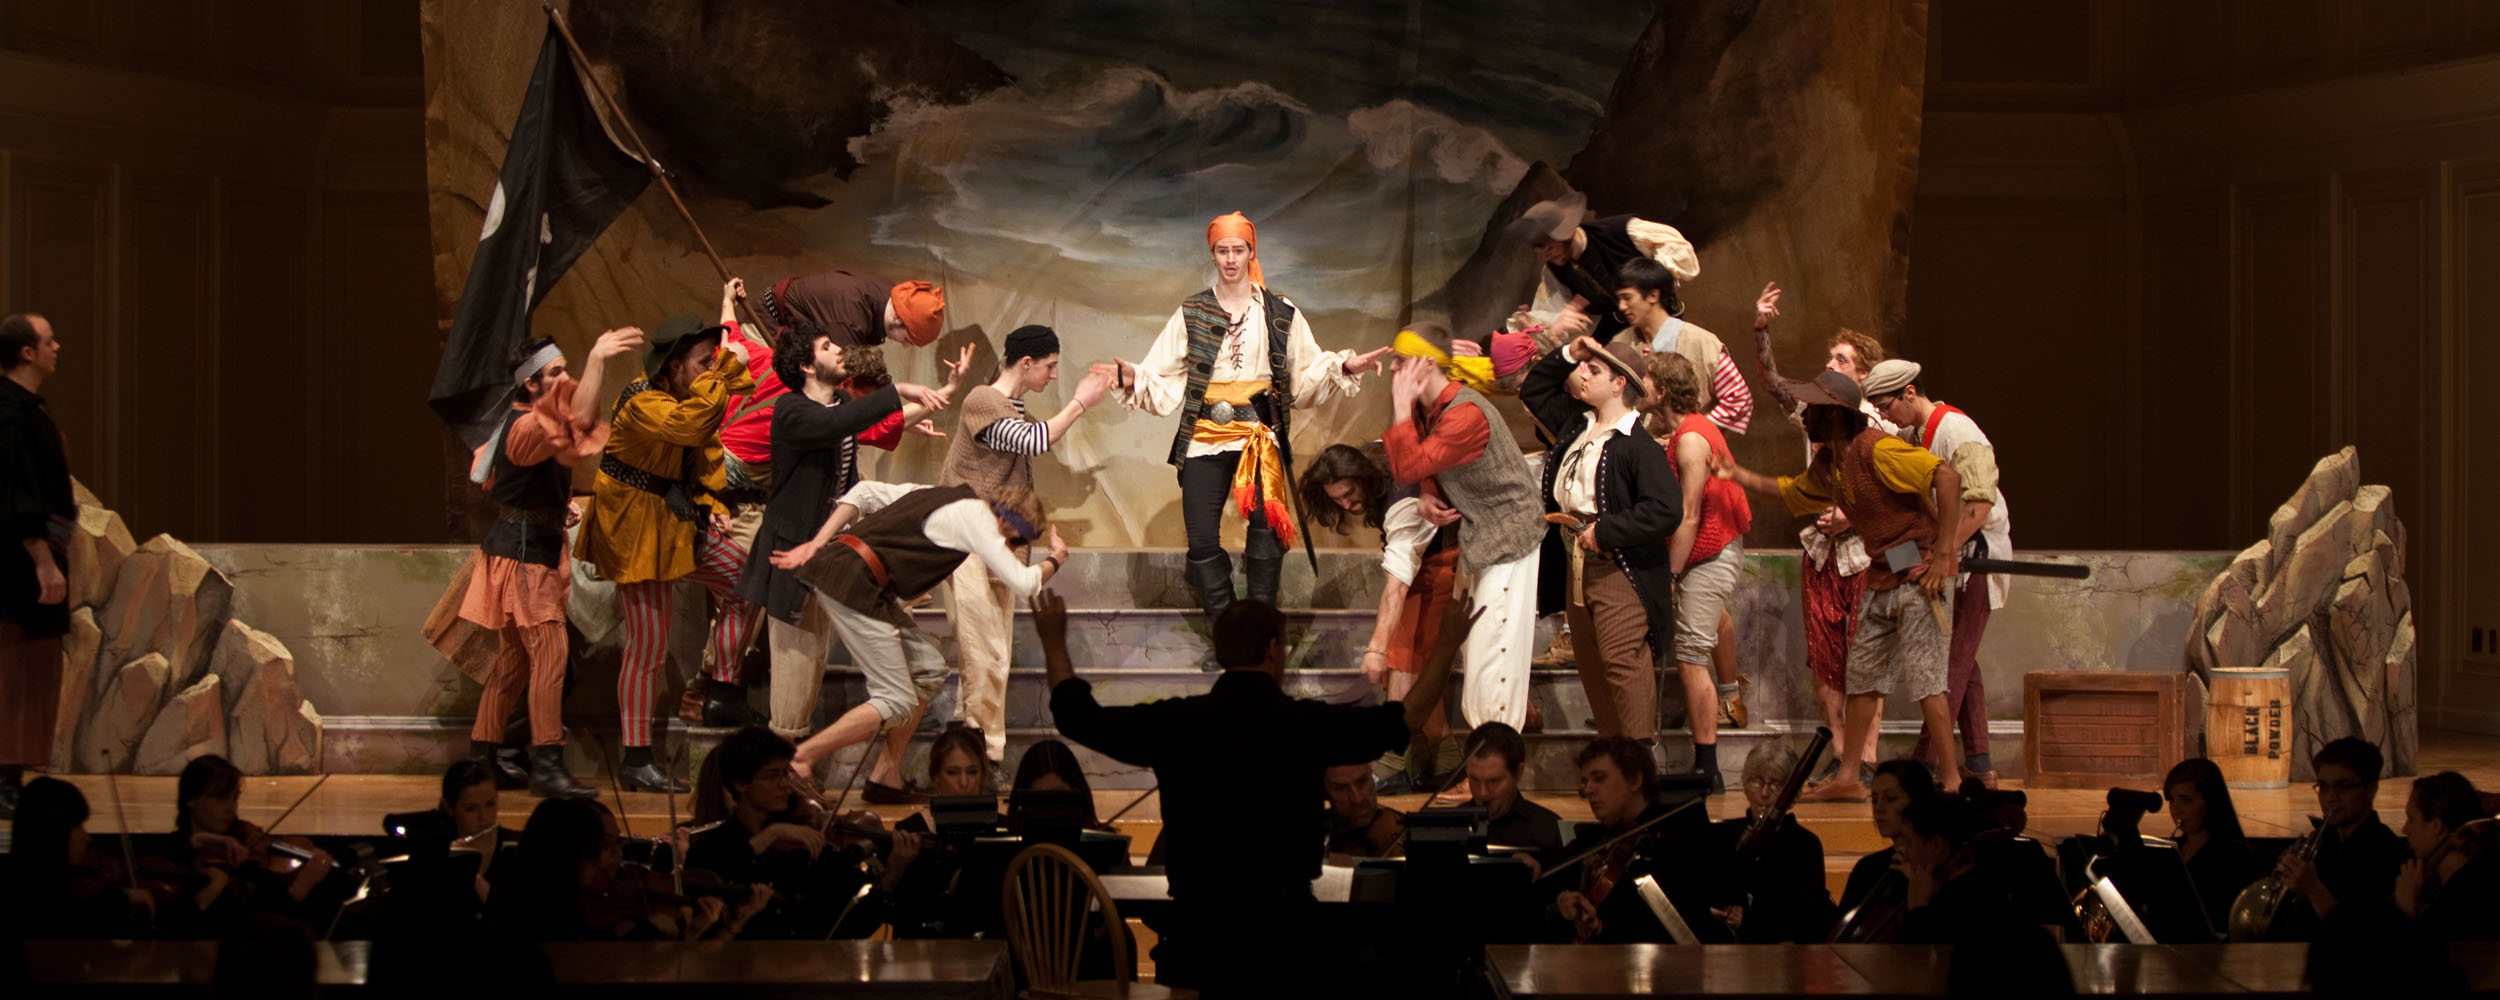 Musical production of Pirates of the Penzance at Gordon College, rated one of the Best College Theatres in America.